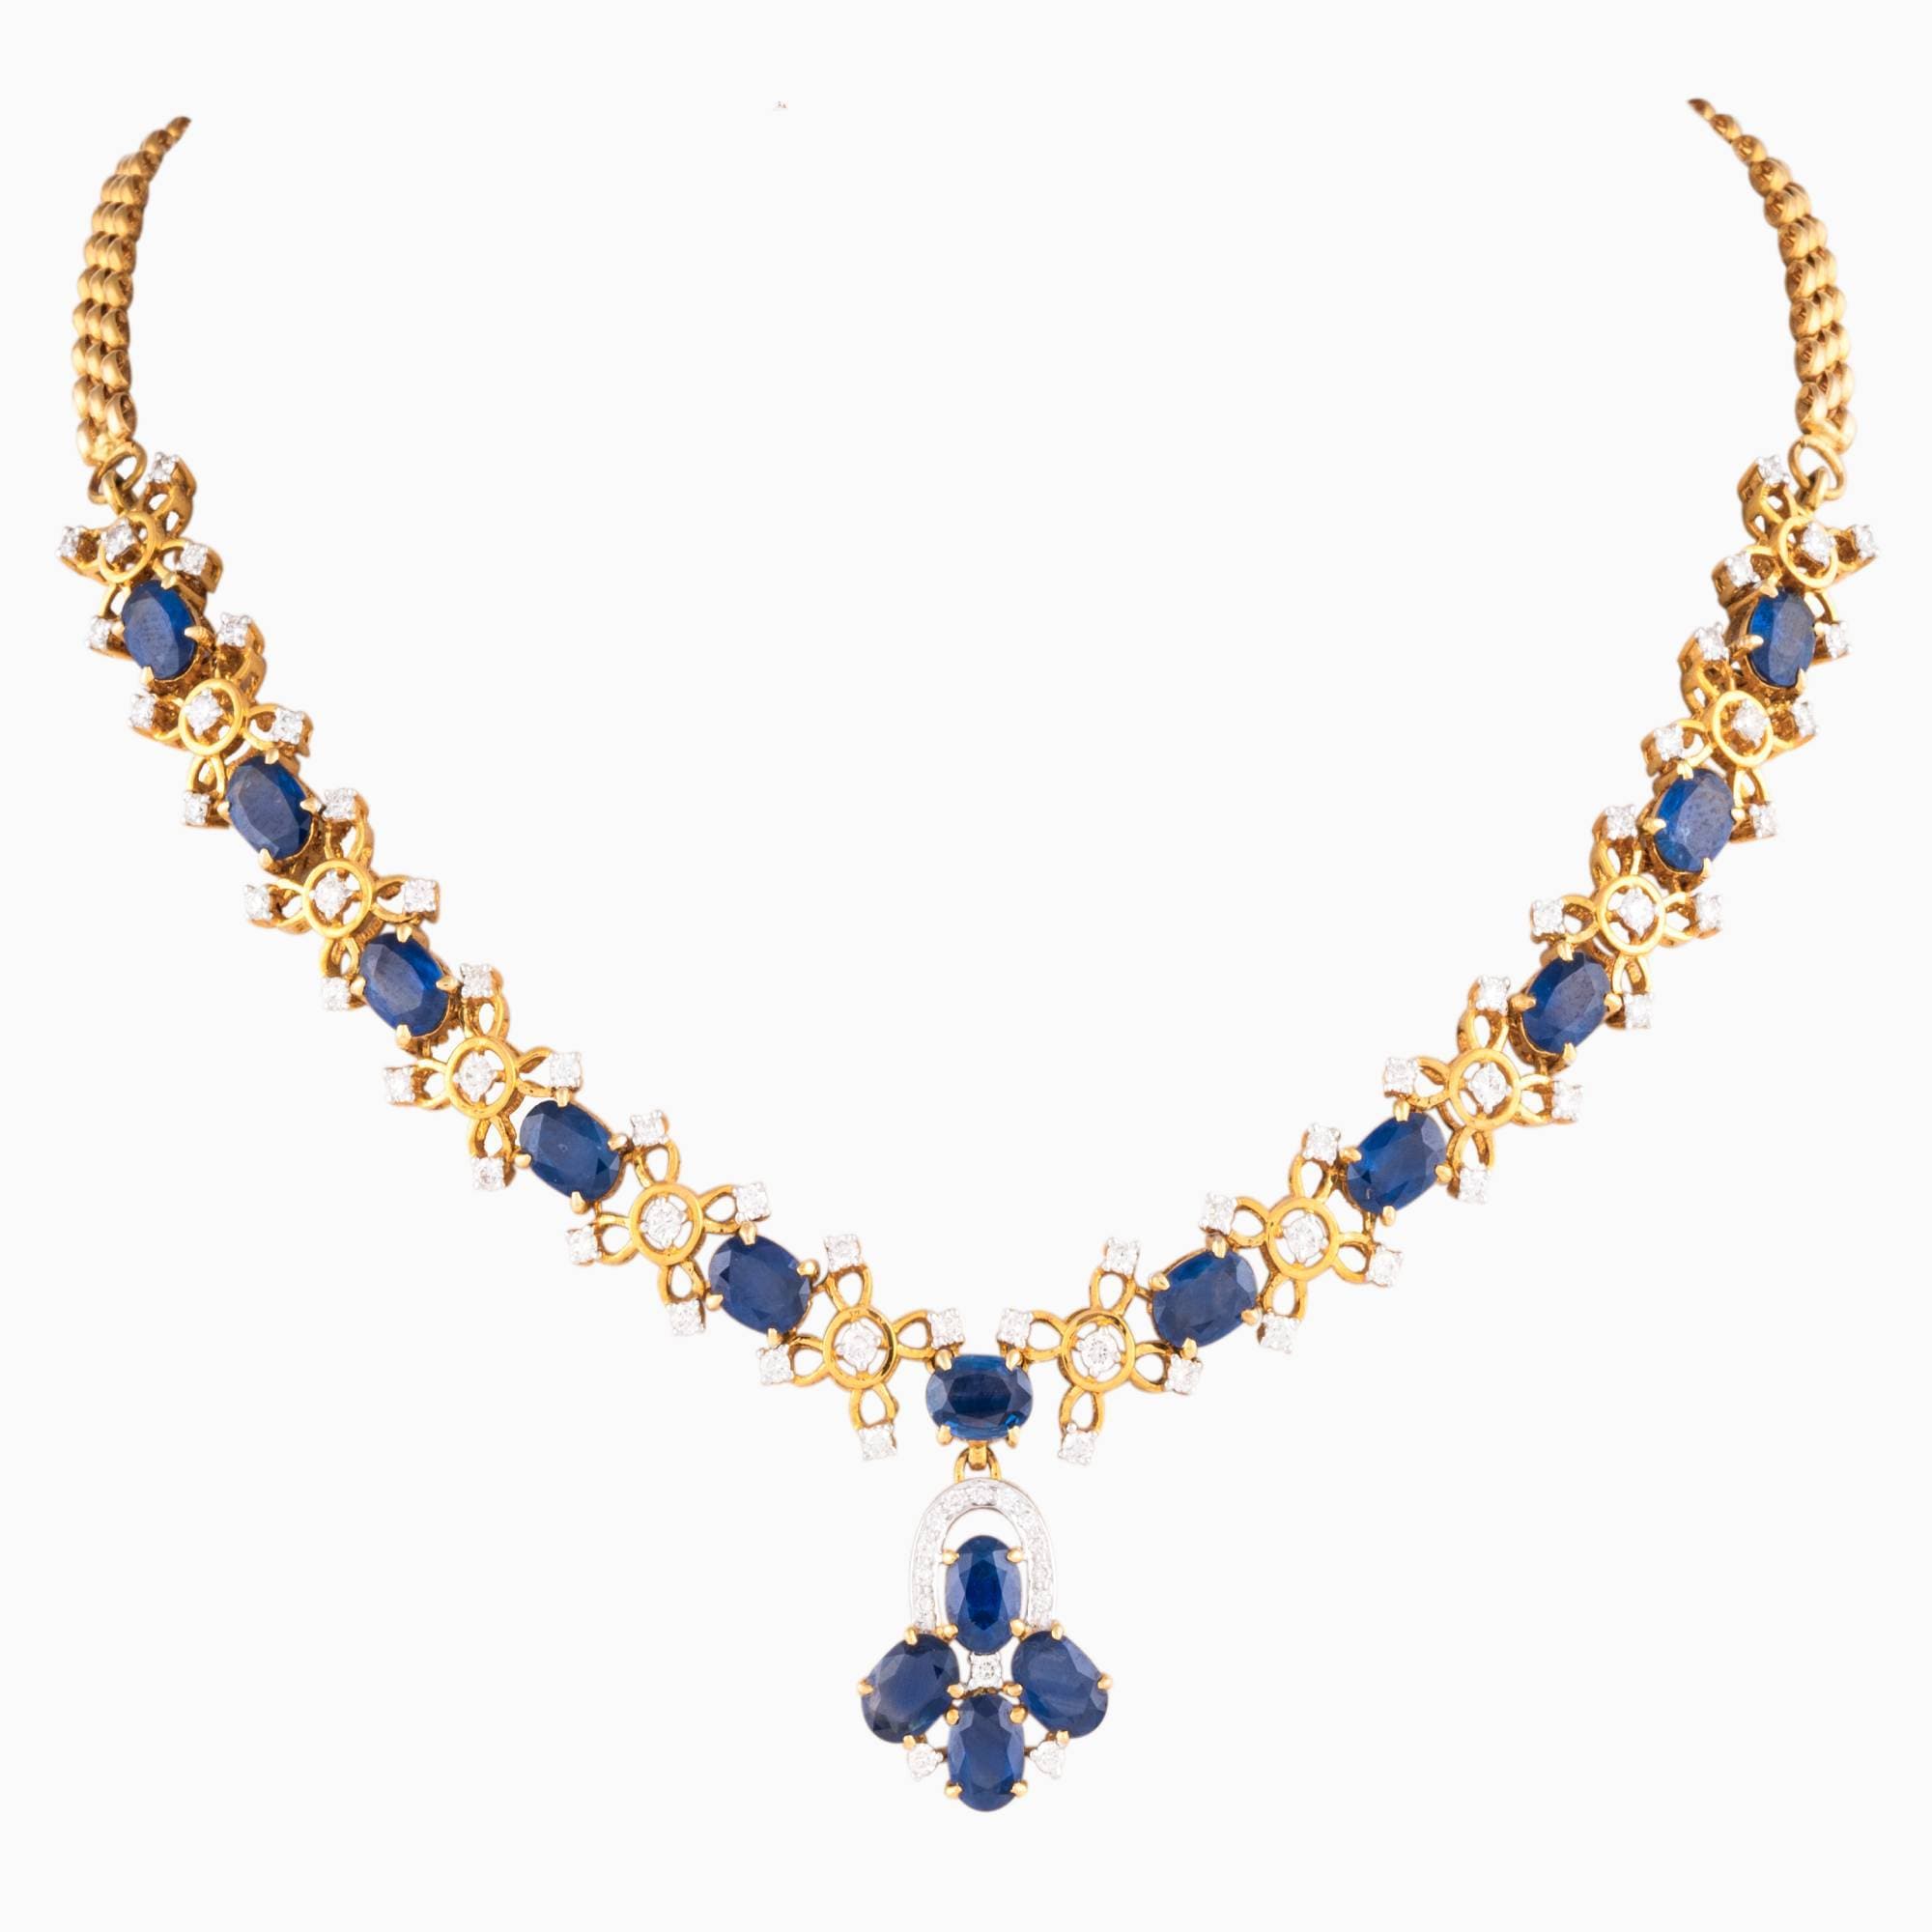 Necklace with Round Cut Diamond and Oval Cut Blue Sapphire -WDN865